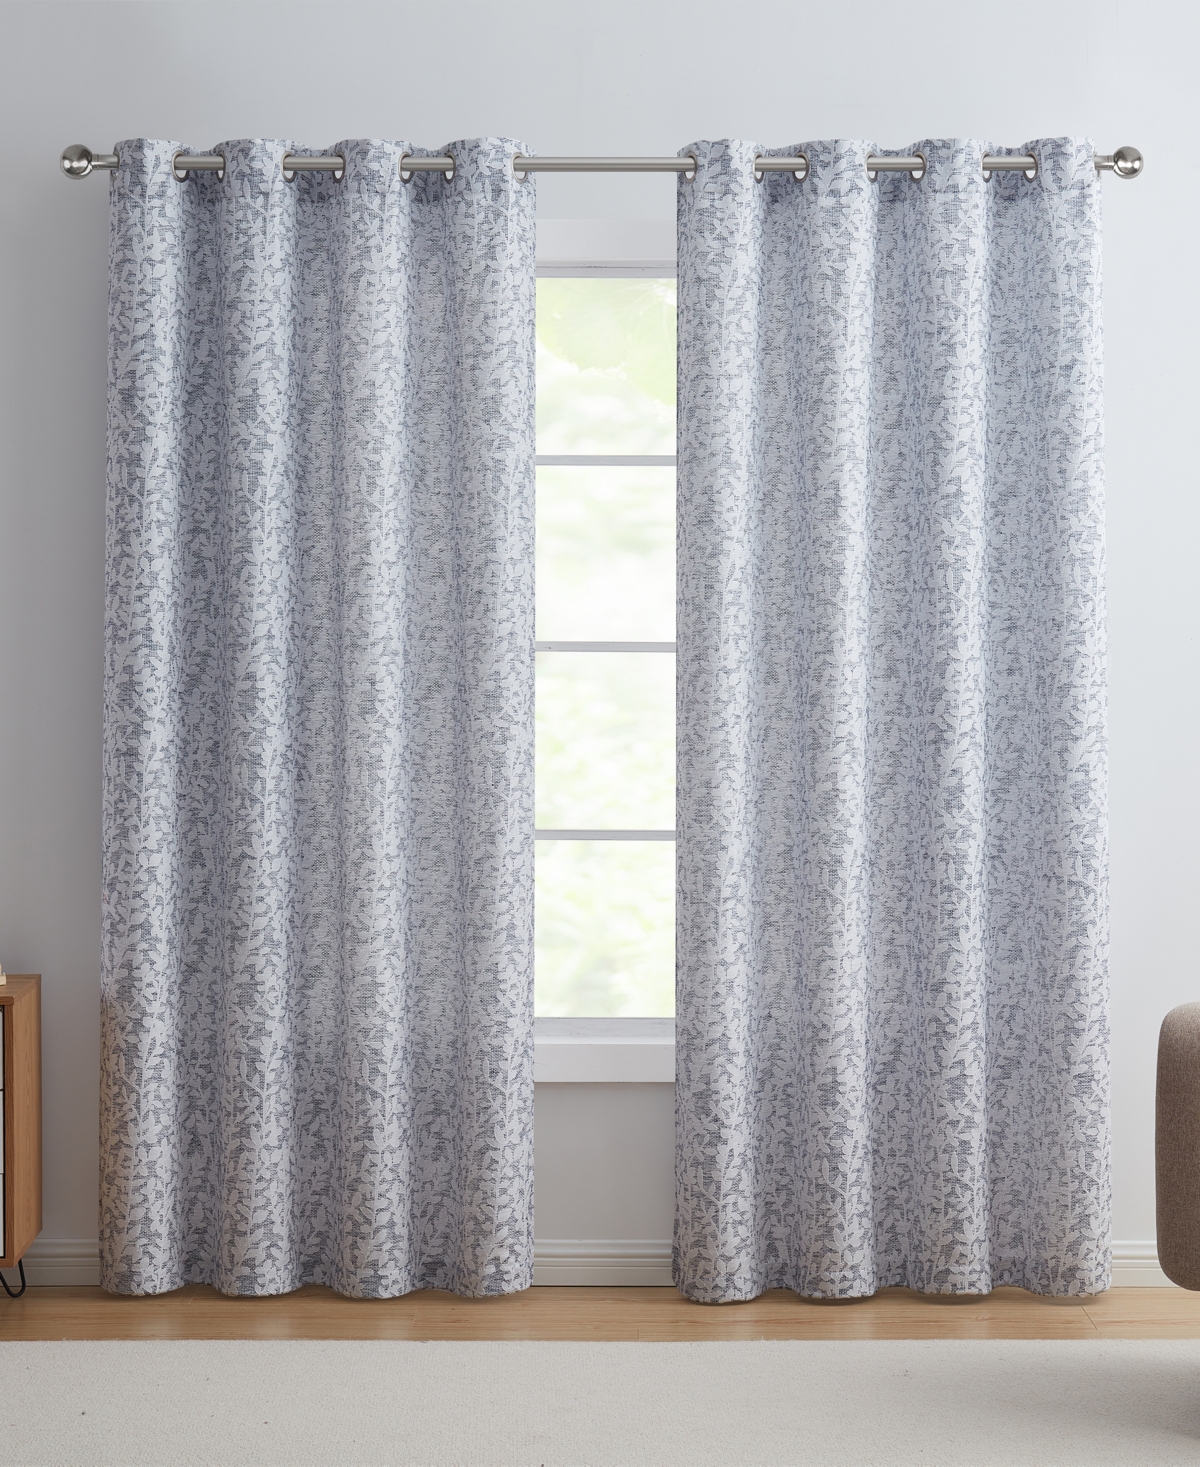 Vcny Home Leah Textured Leaf Grommet Curtain Panel, 54" X 96" In Blue